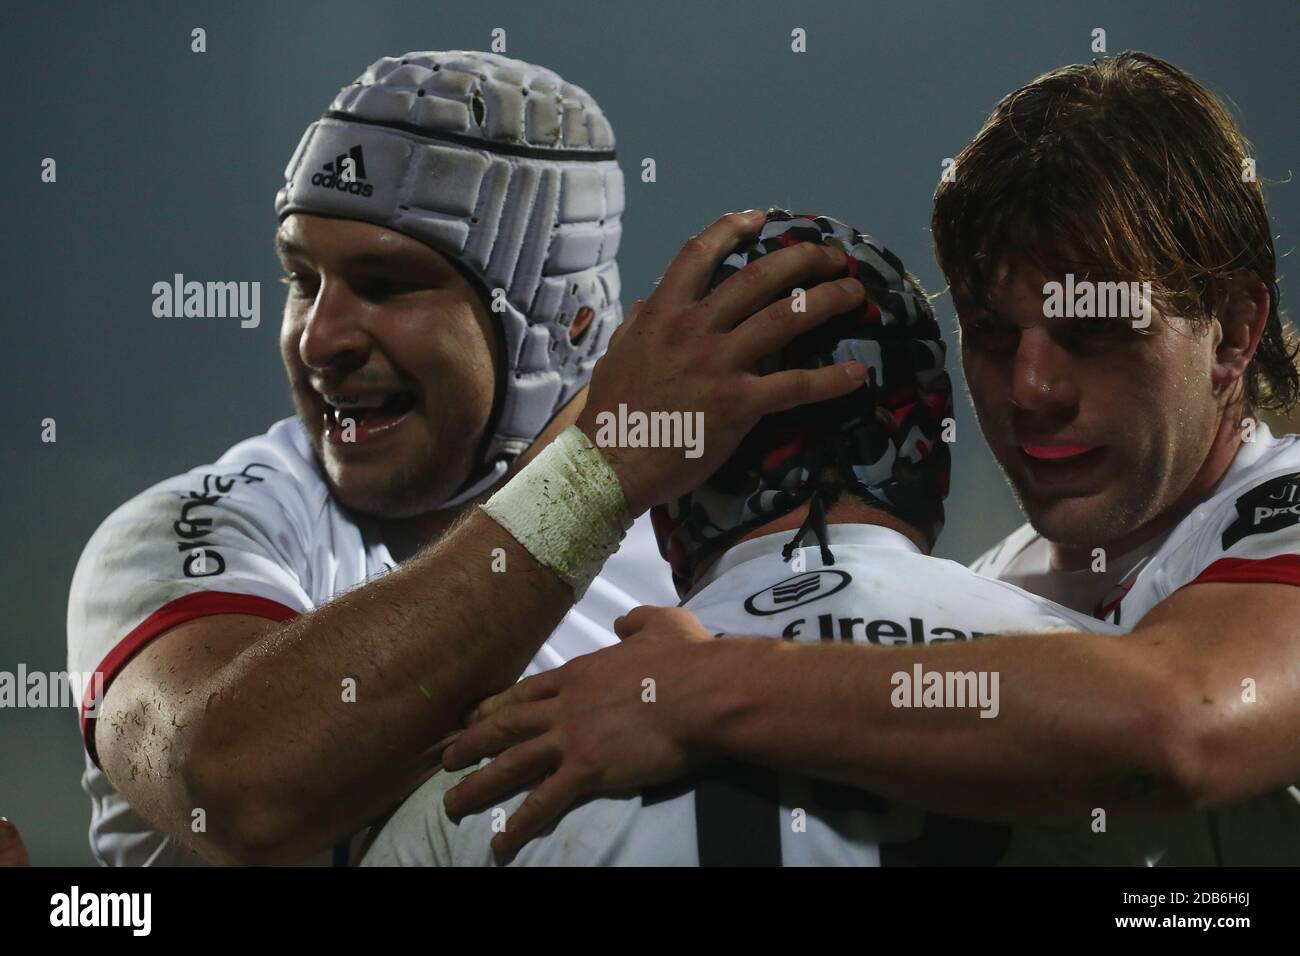 Sergio Lanfranchi stadium, Parma, Italy, 16 Nov 2020, Ulster celebrates the try during Zebre Rugby vs Ulster Rugby, Rugby Guinness Pro 14 match - Photo Massimiliano Carnabuci / LM Stock Photo